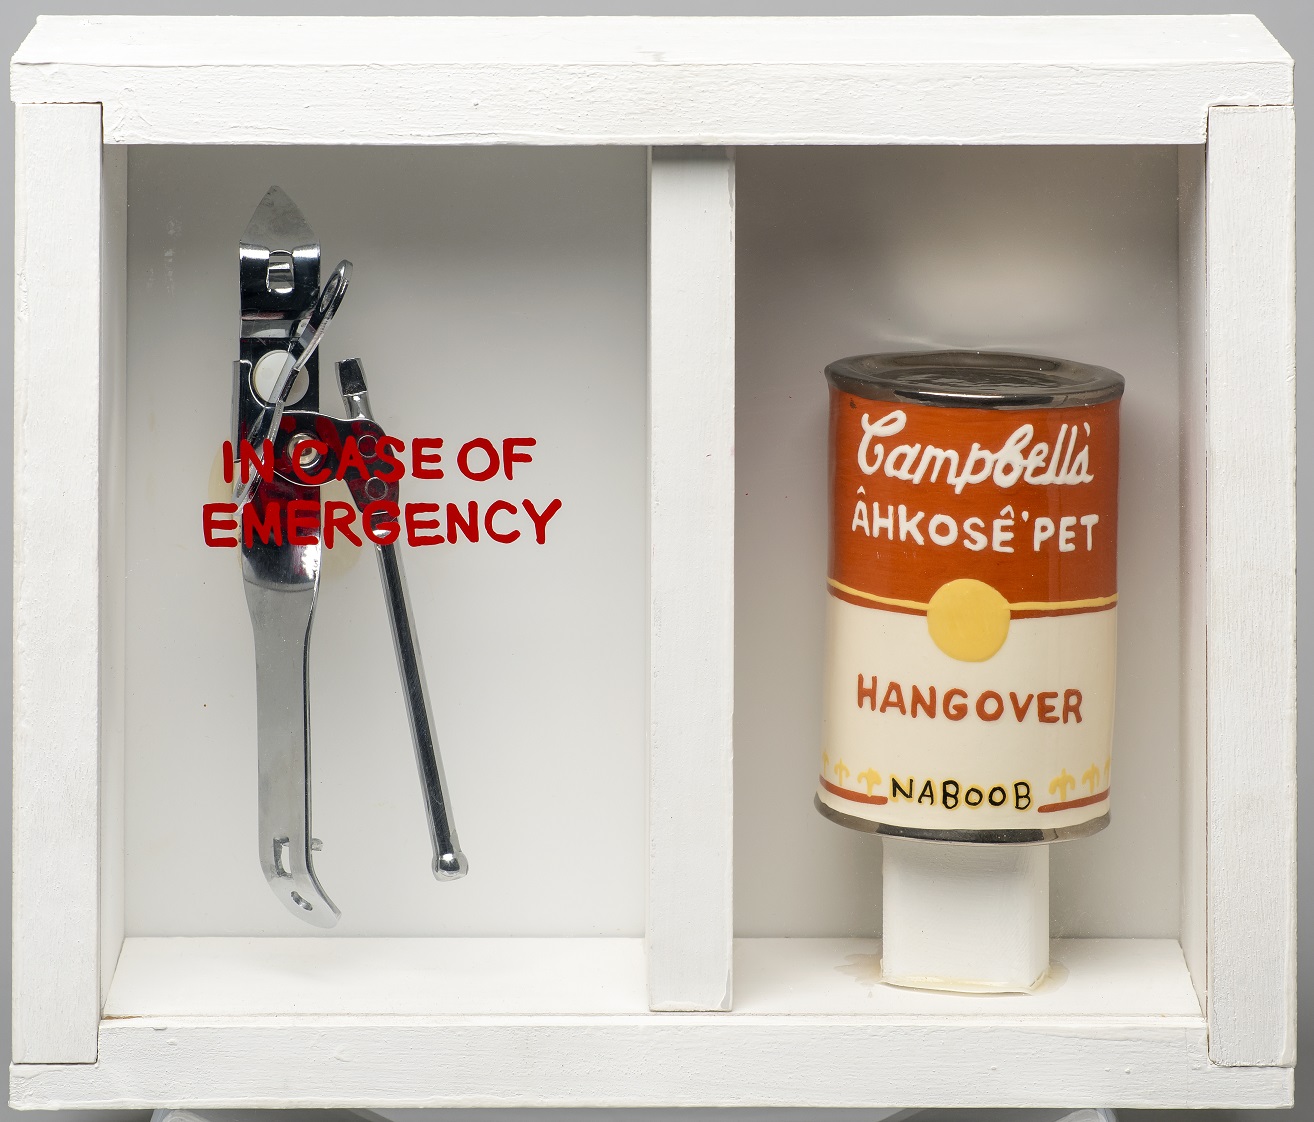 <small>"Elizabeth Judy Chartrand (b. 1959), Hangover Soup, 2002, ceramic, wood, plexiglass, readymade, © Judy Chartrand. Reproduced with permission. Photograph by the University of Regina."
</small>